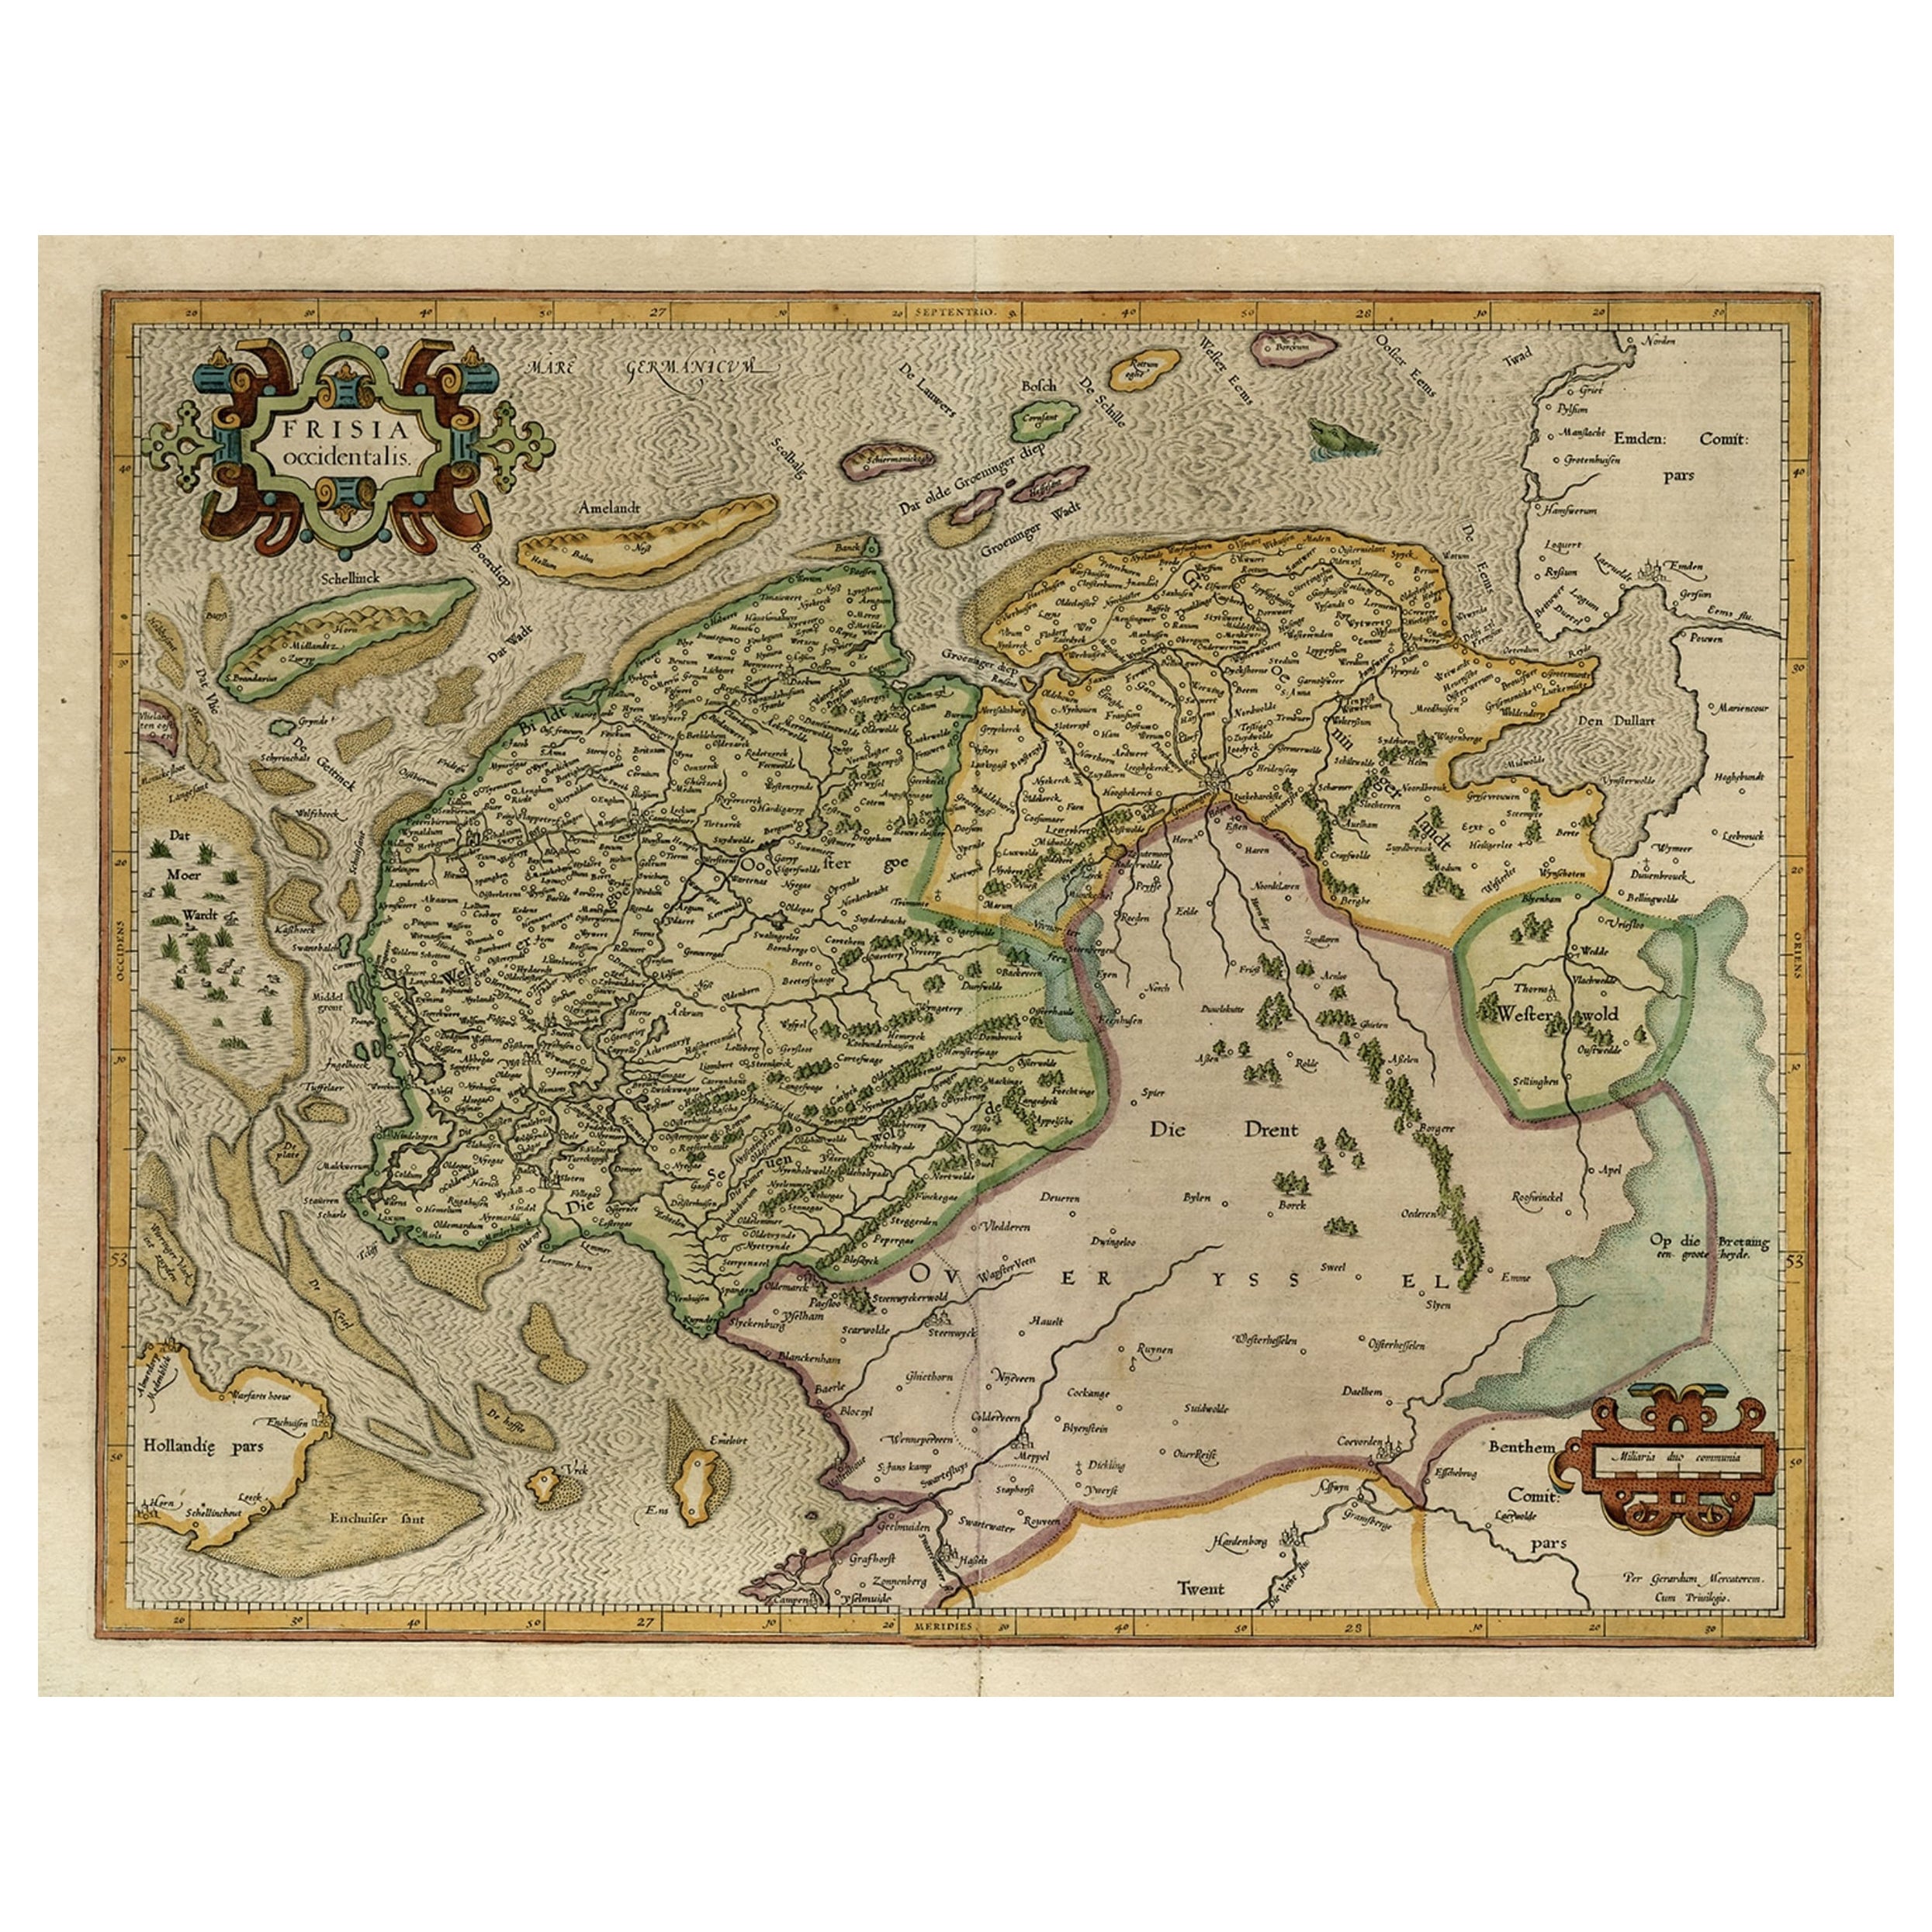 Old Map of the Dutch Provinces of Friesland and Groningen, The Netherlands, 1604